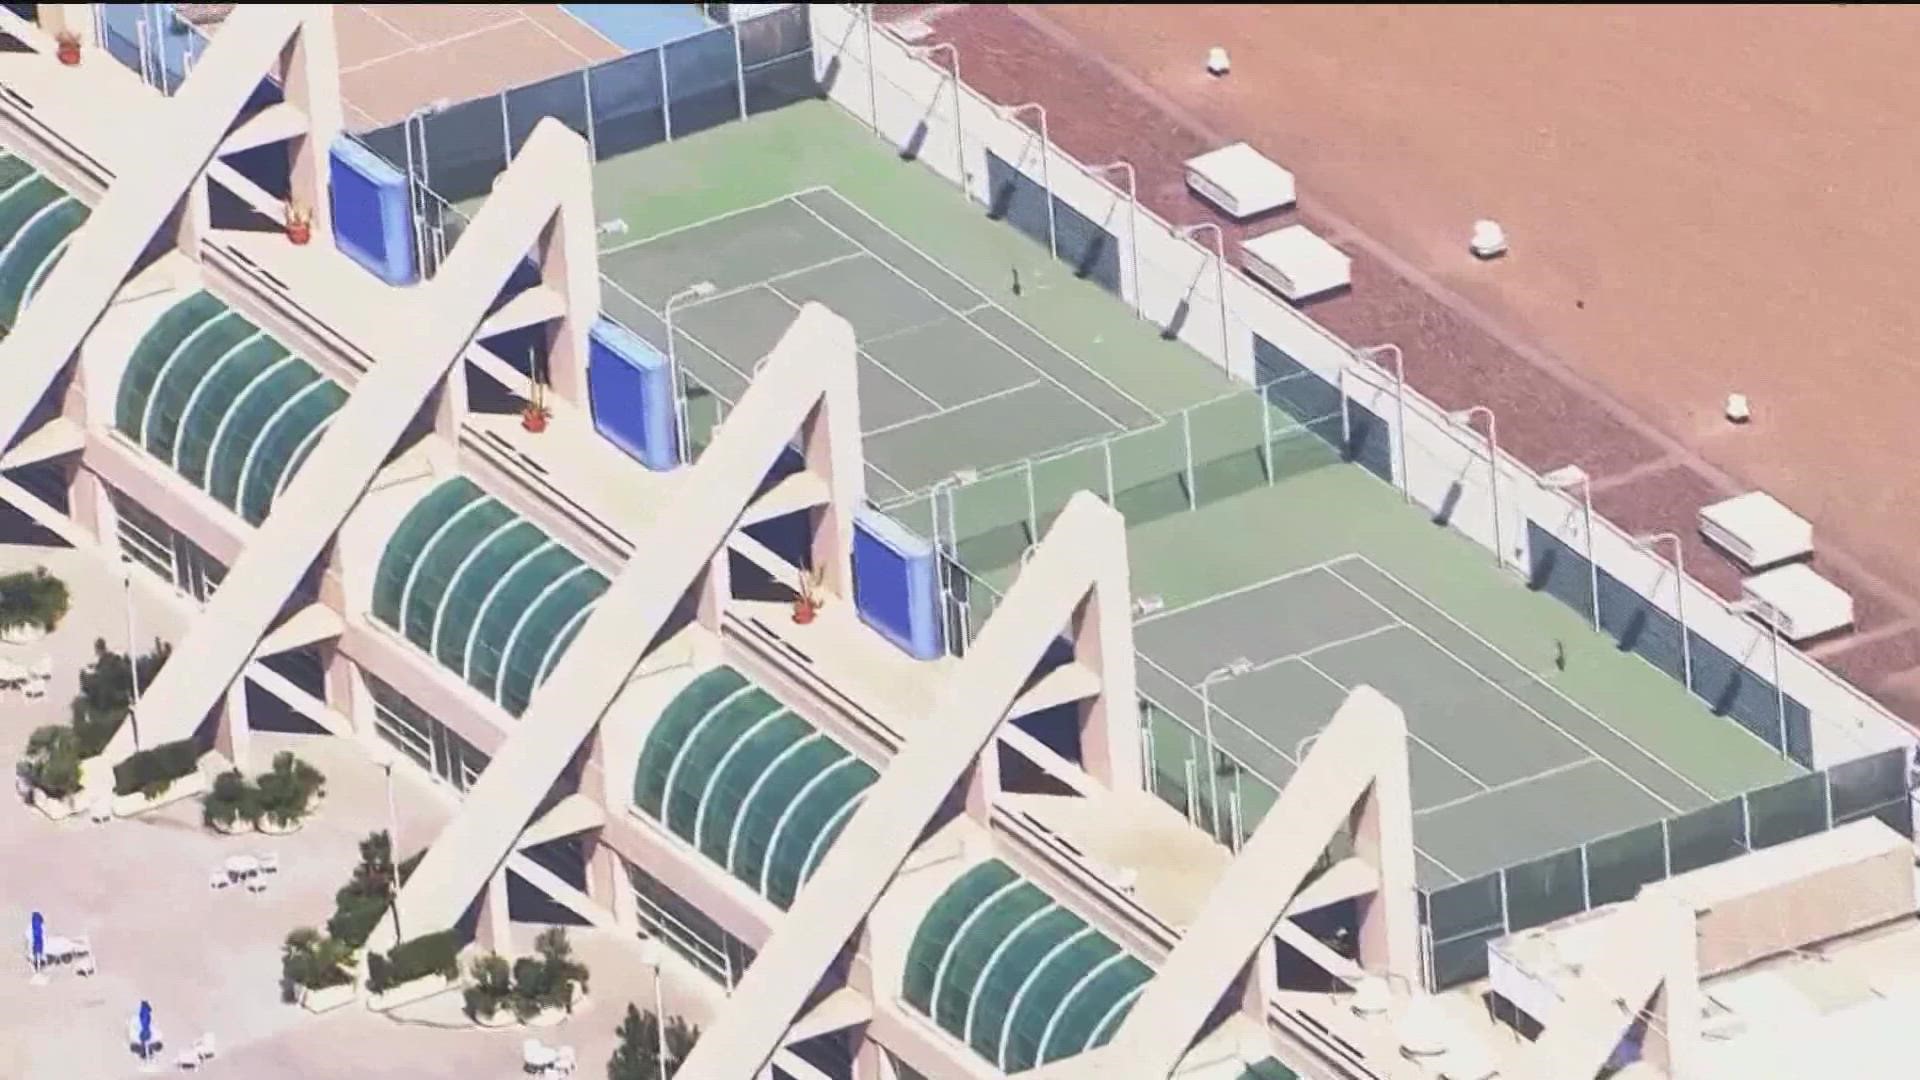 Viewers reached out to CBS 8 because those courts have been closed for more than a decade and people want to use them.